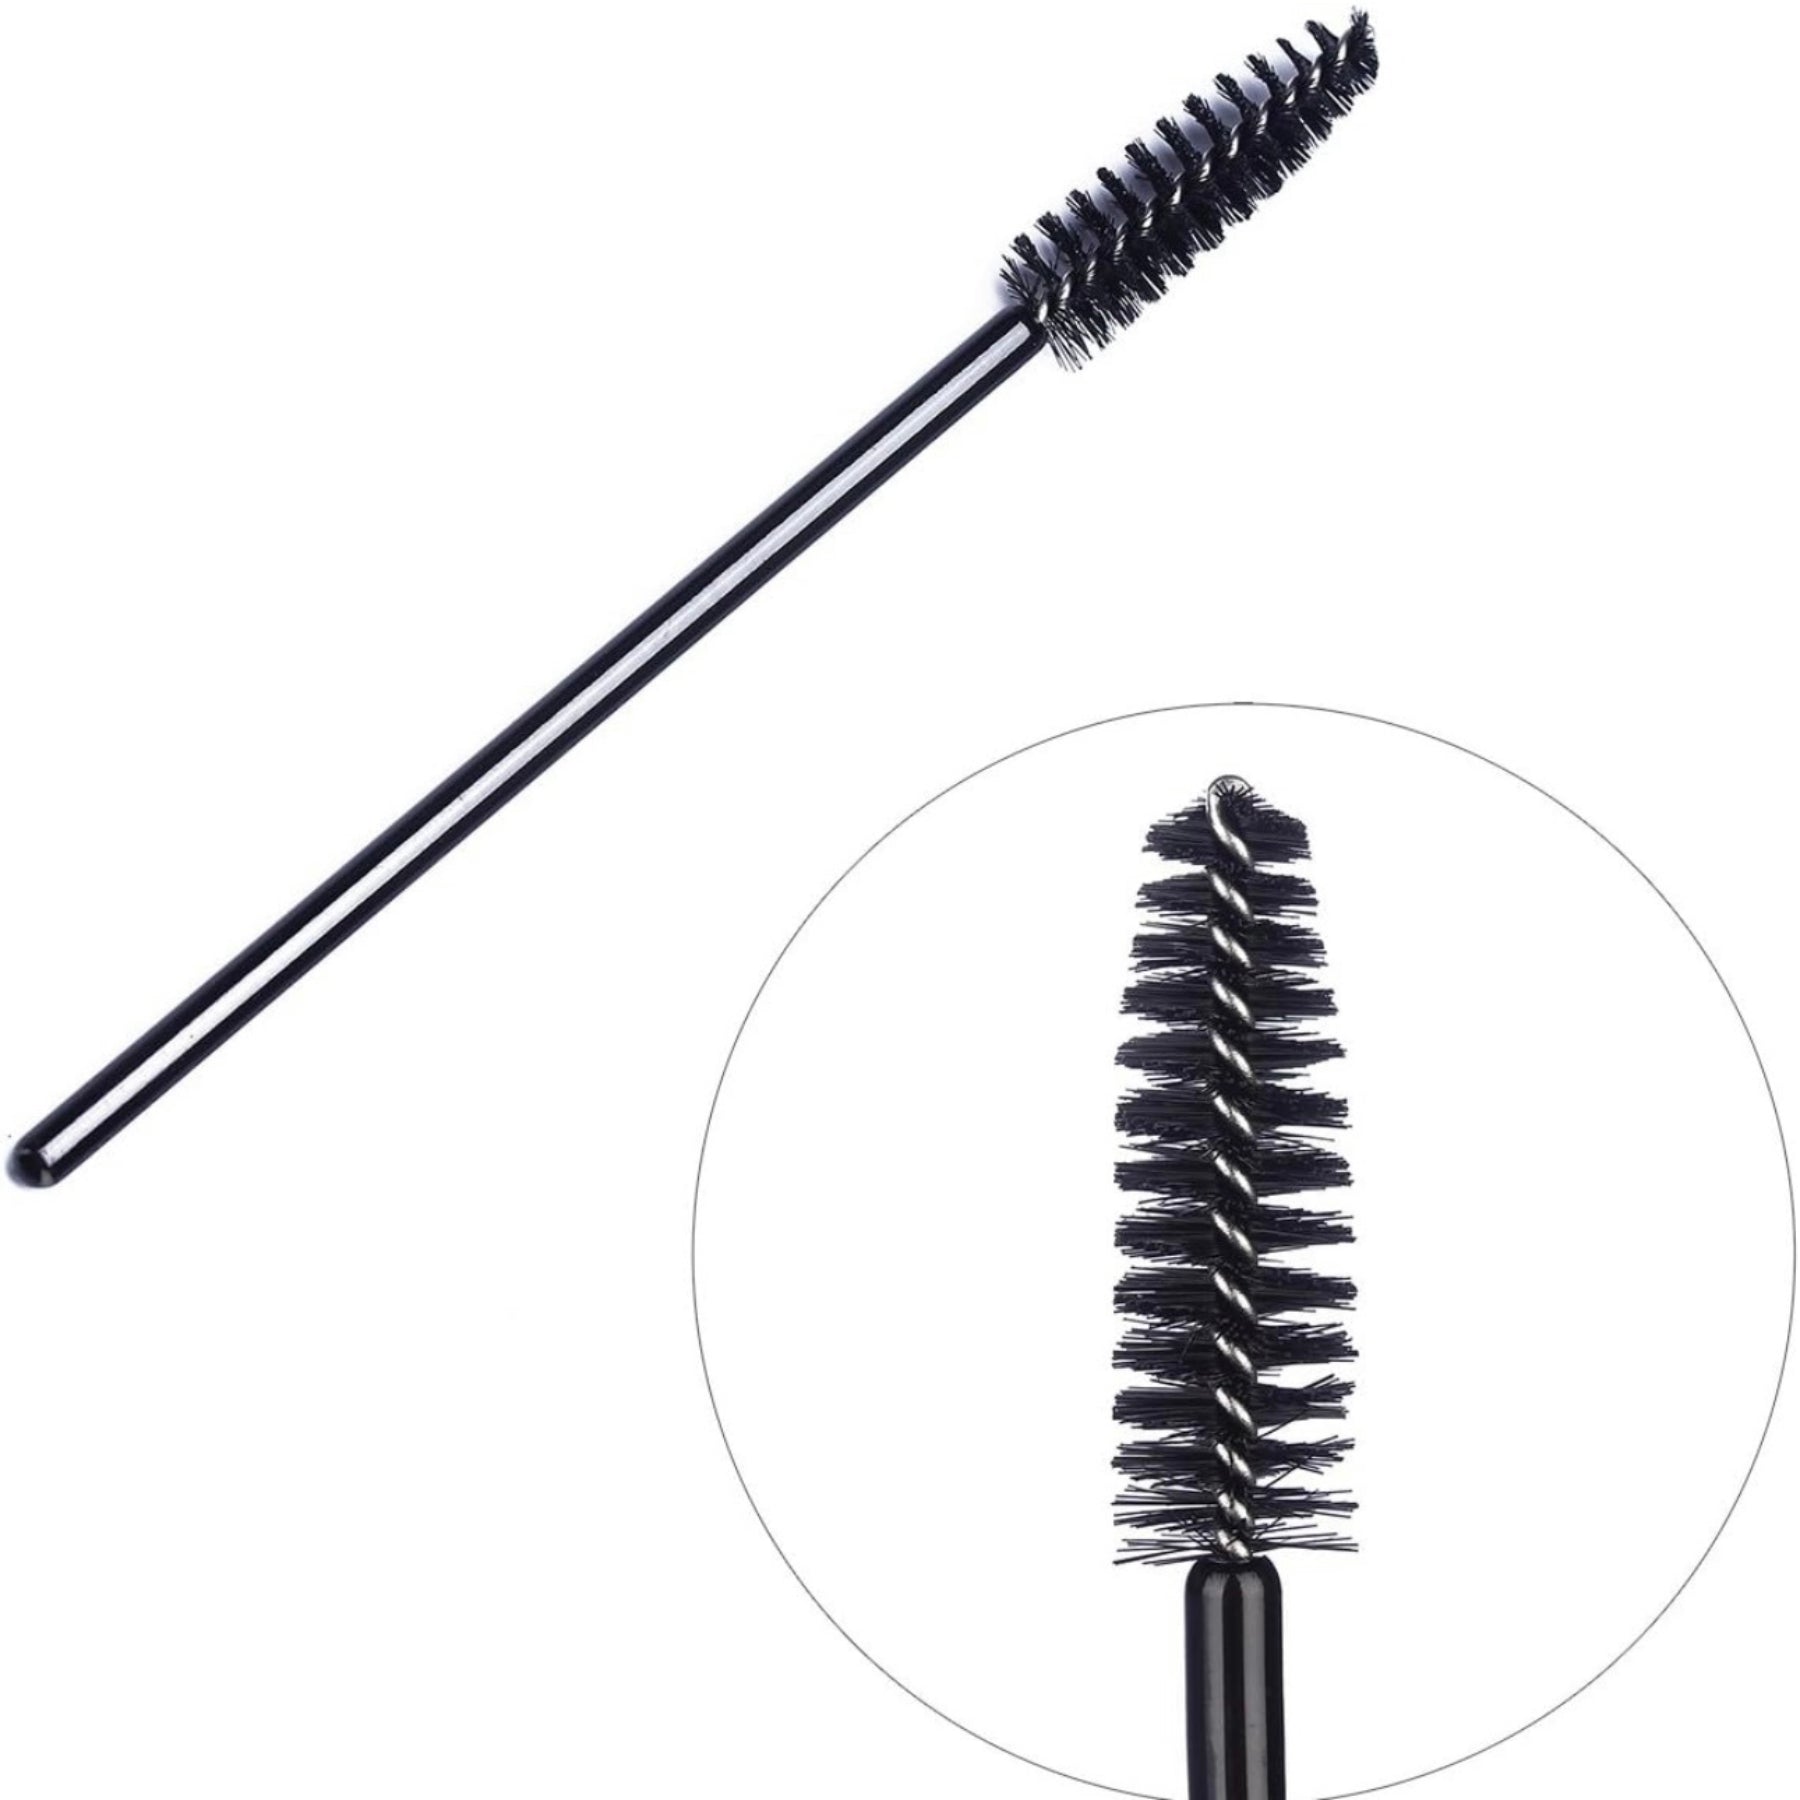 Lash & Brow Styling Brush (with an additional close-up view) against a white background.